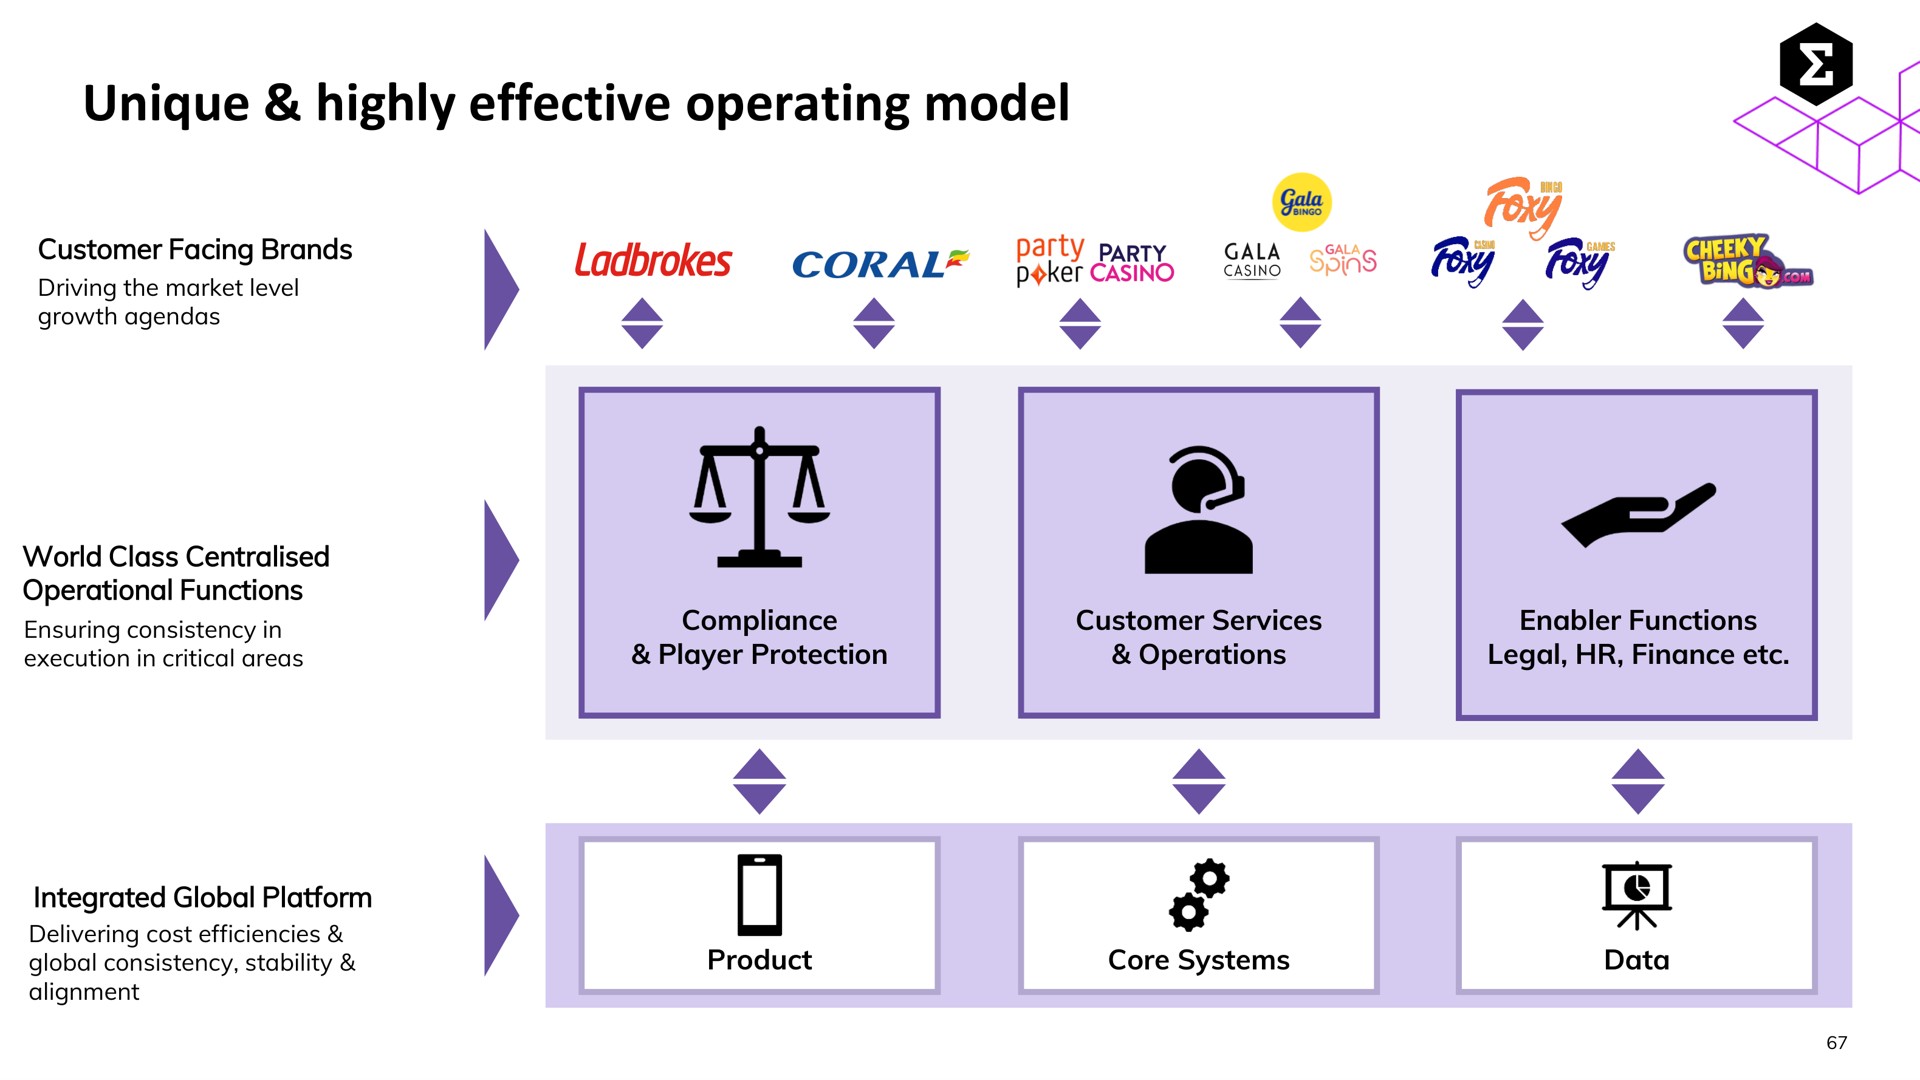 unique highly effective operating model foy fog | Entain Group